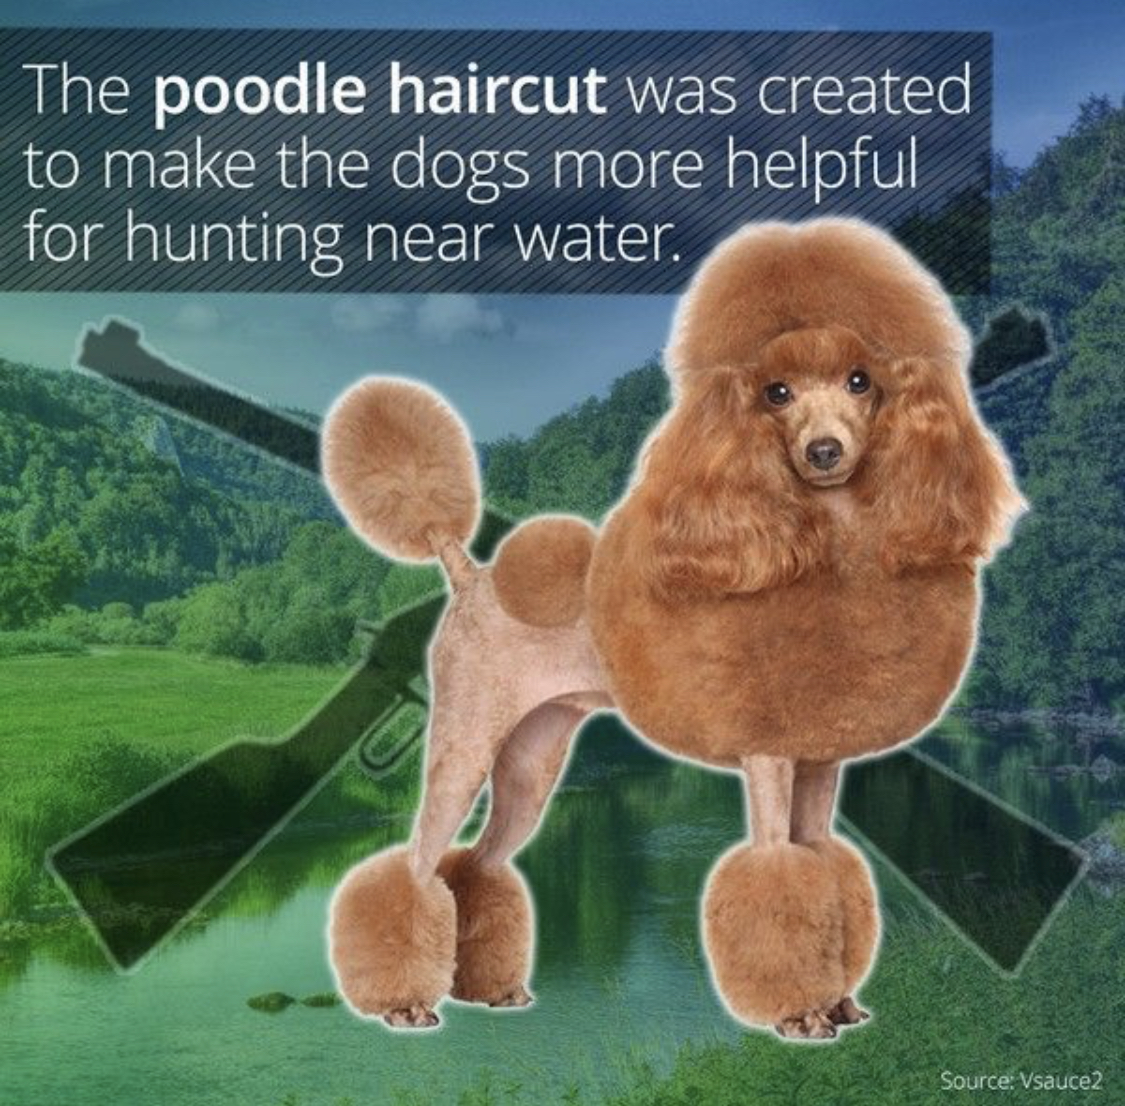 apricot Poodle in show haircut photo with caption- The poodle haircut was created to make the dogs more helpful for hunting near water.